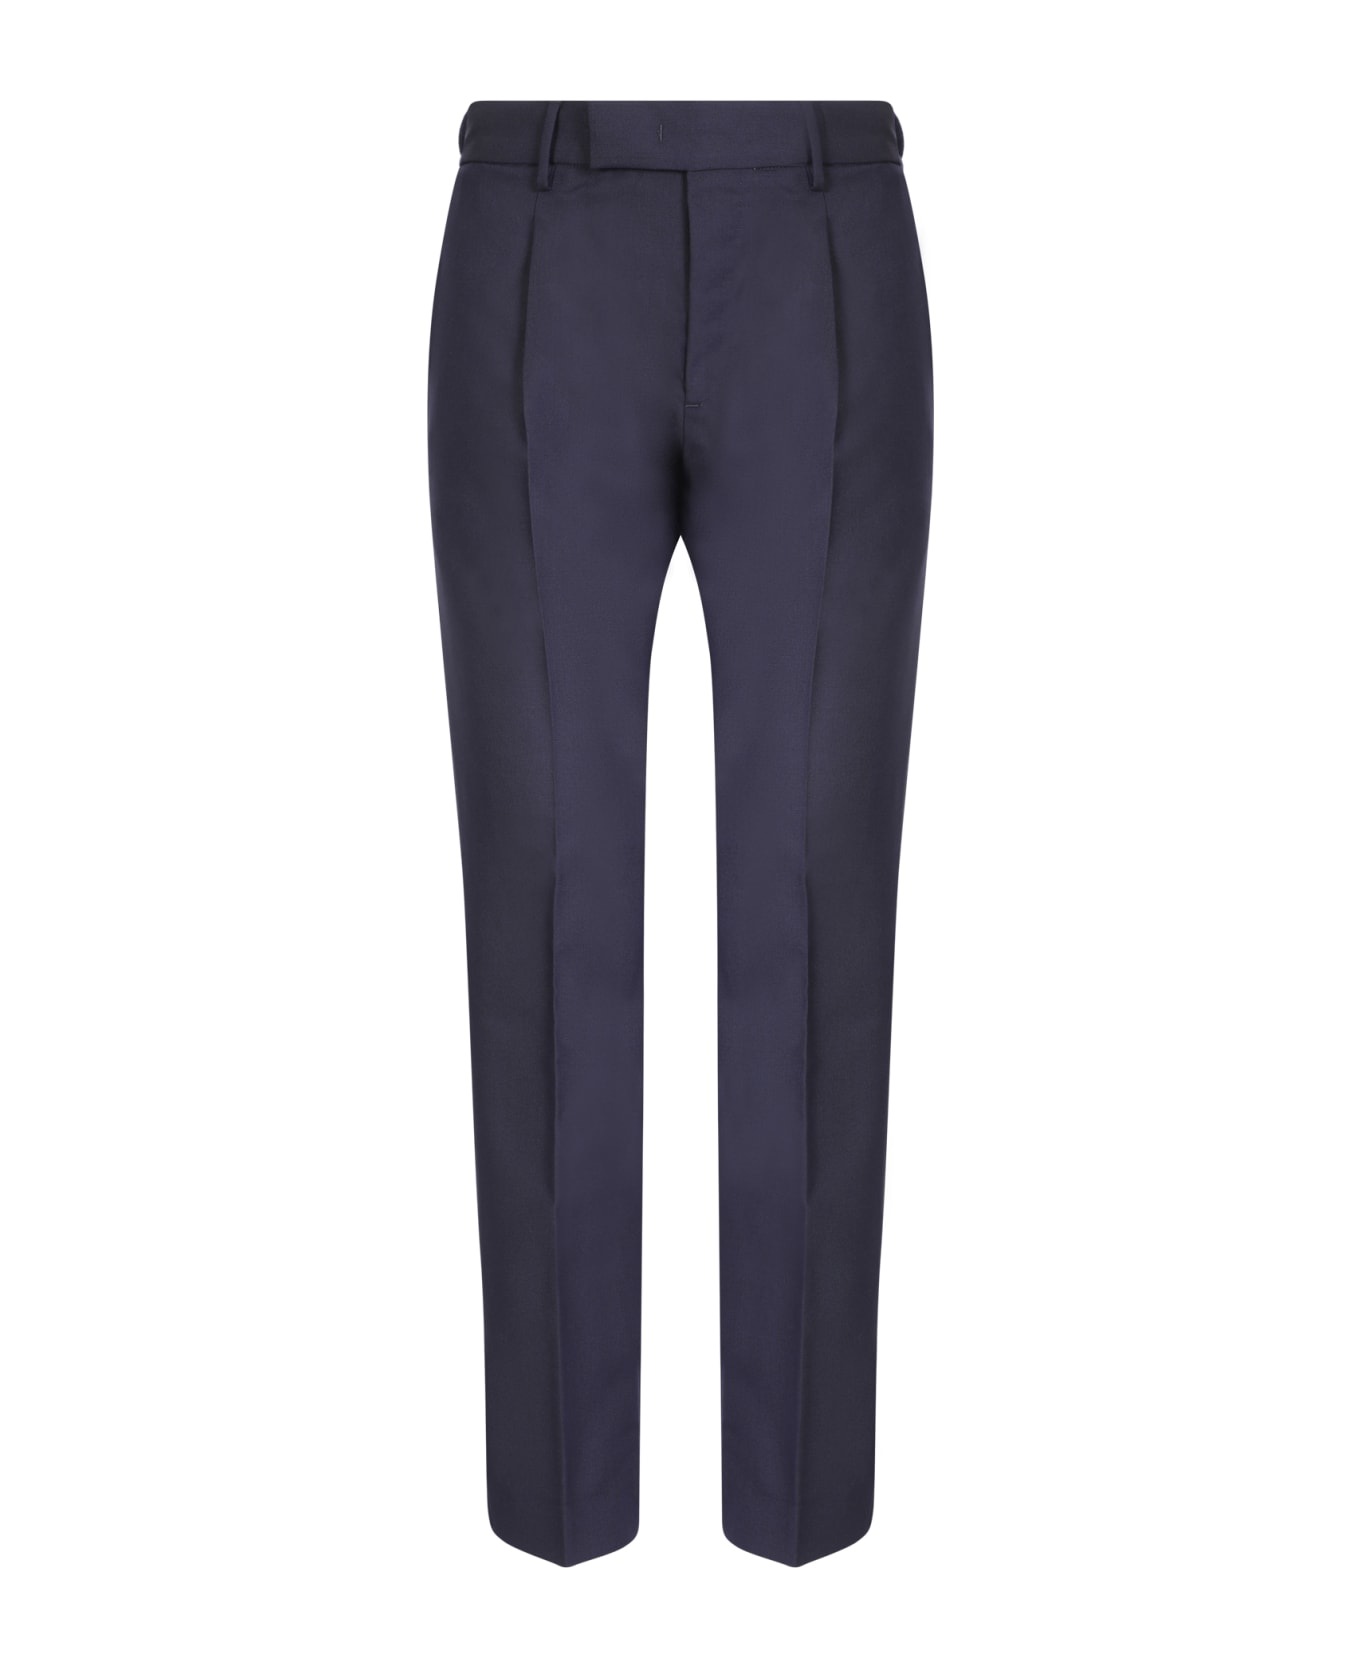 PT Torino Skinny Tailored Trousers - Blue ボトムス